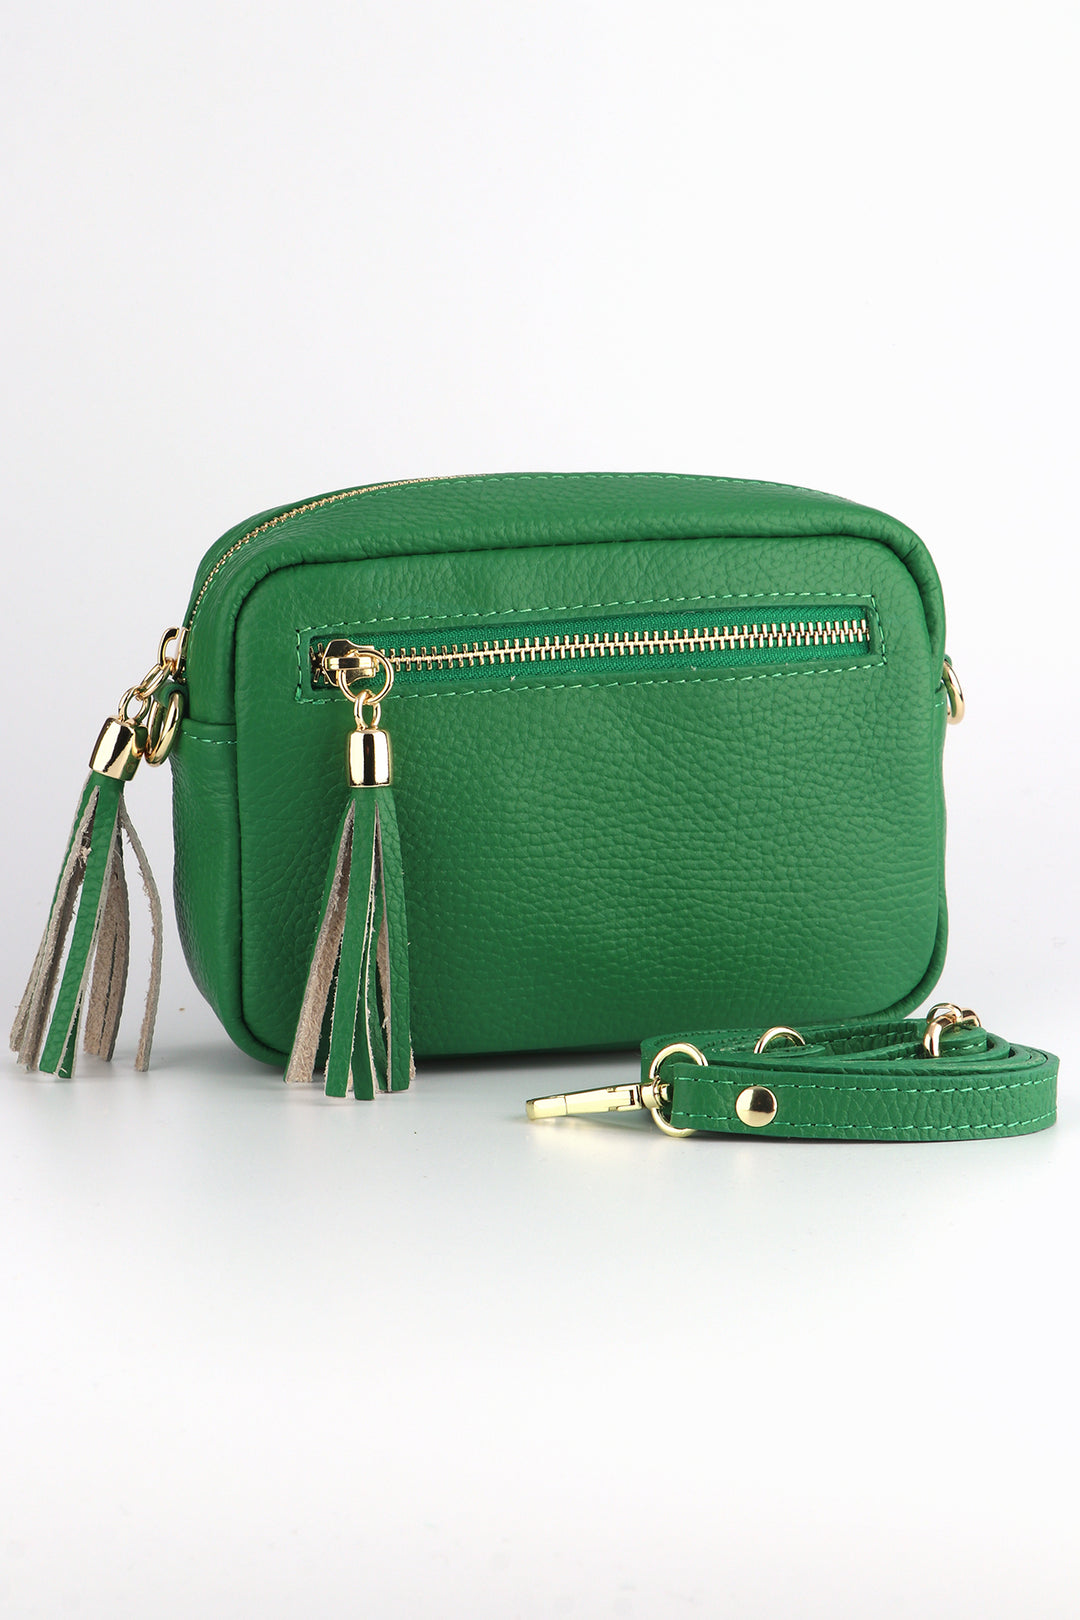 green leather crossbody camera bag with a front zip pocket and matching detachable bag strap